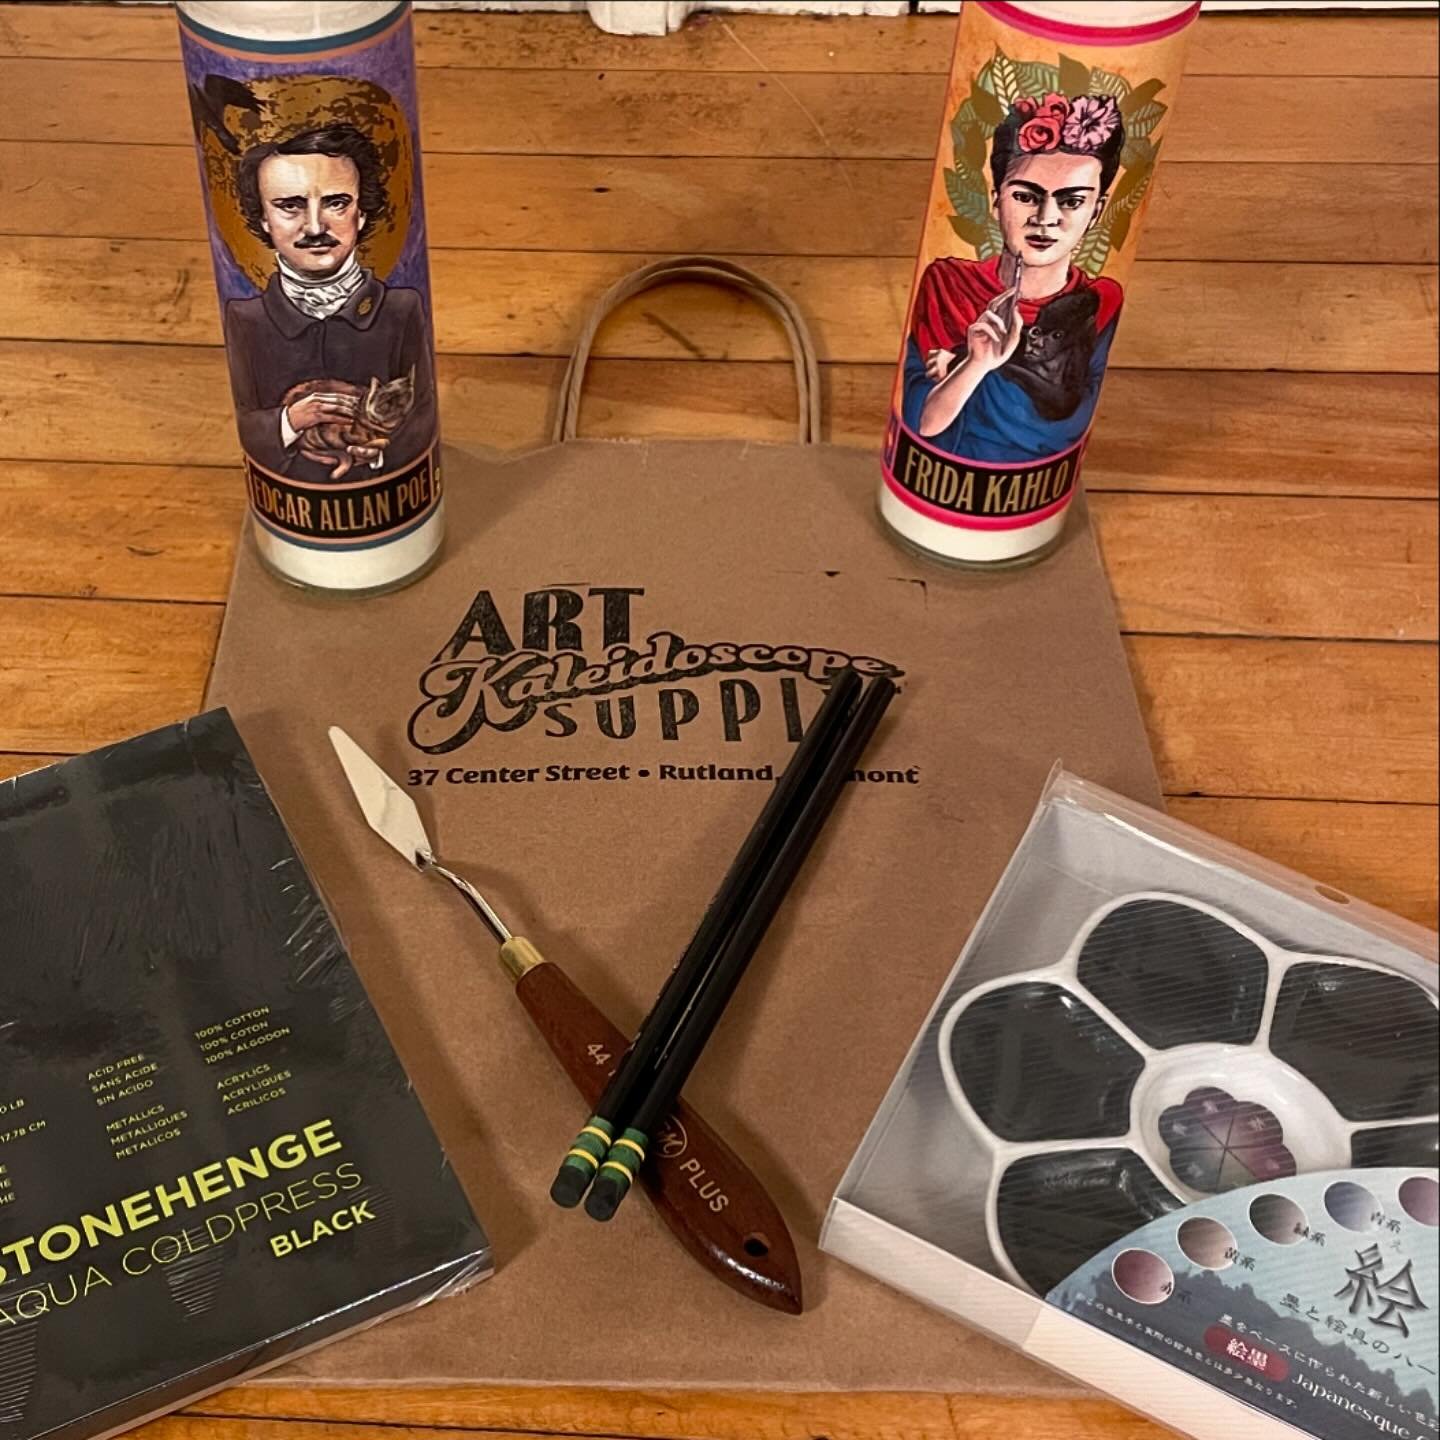 One of the best things that&rsquo;s happened to @downtownrutland in a long time, a proper art and writing supply store. @kaleidoscope_artsup , I can&rsquo;t wait to experience your workshops and everything else you have planned. Thank you for keeping